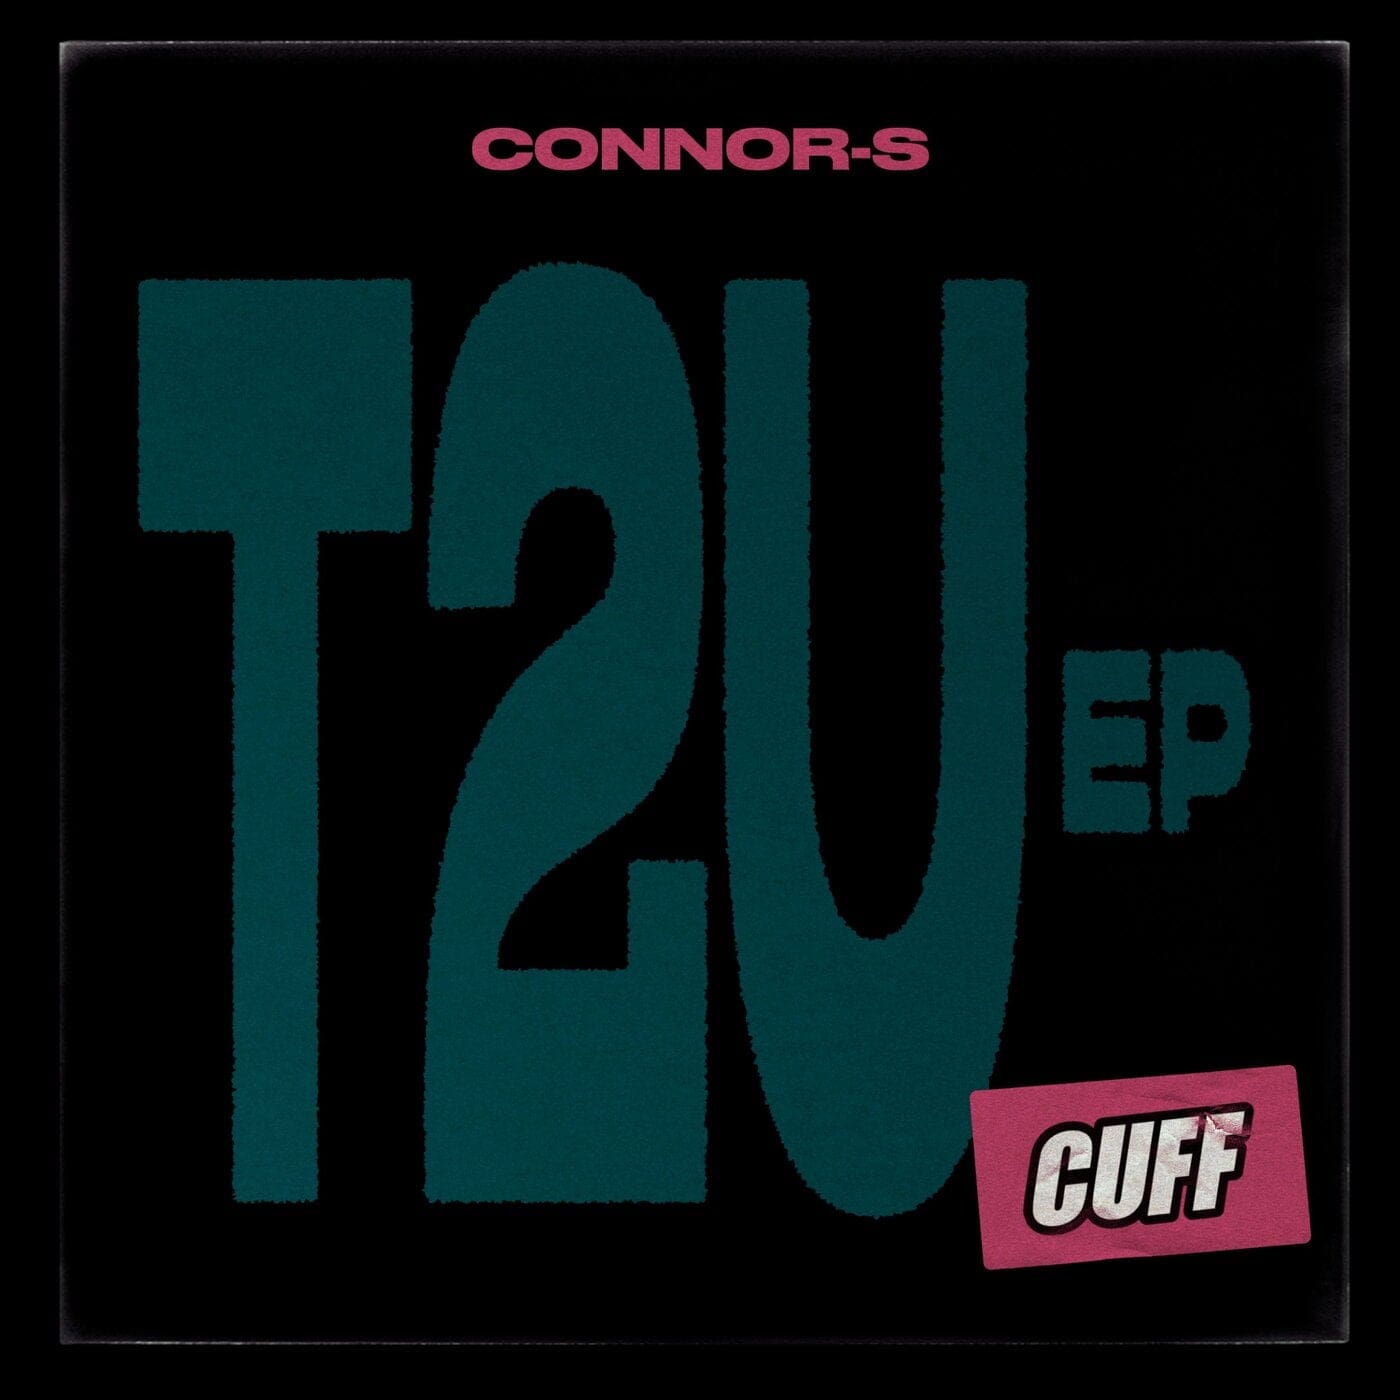 Download Connor-S - T2U EP on Electrobuzz